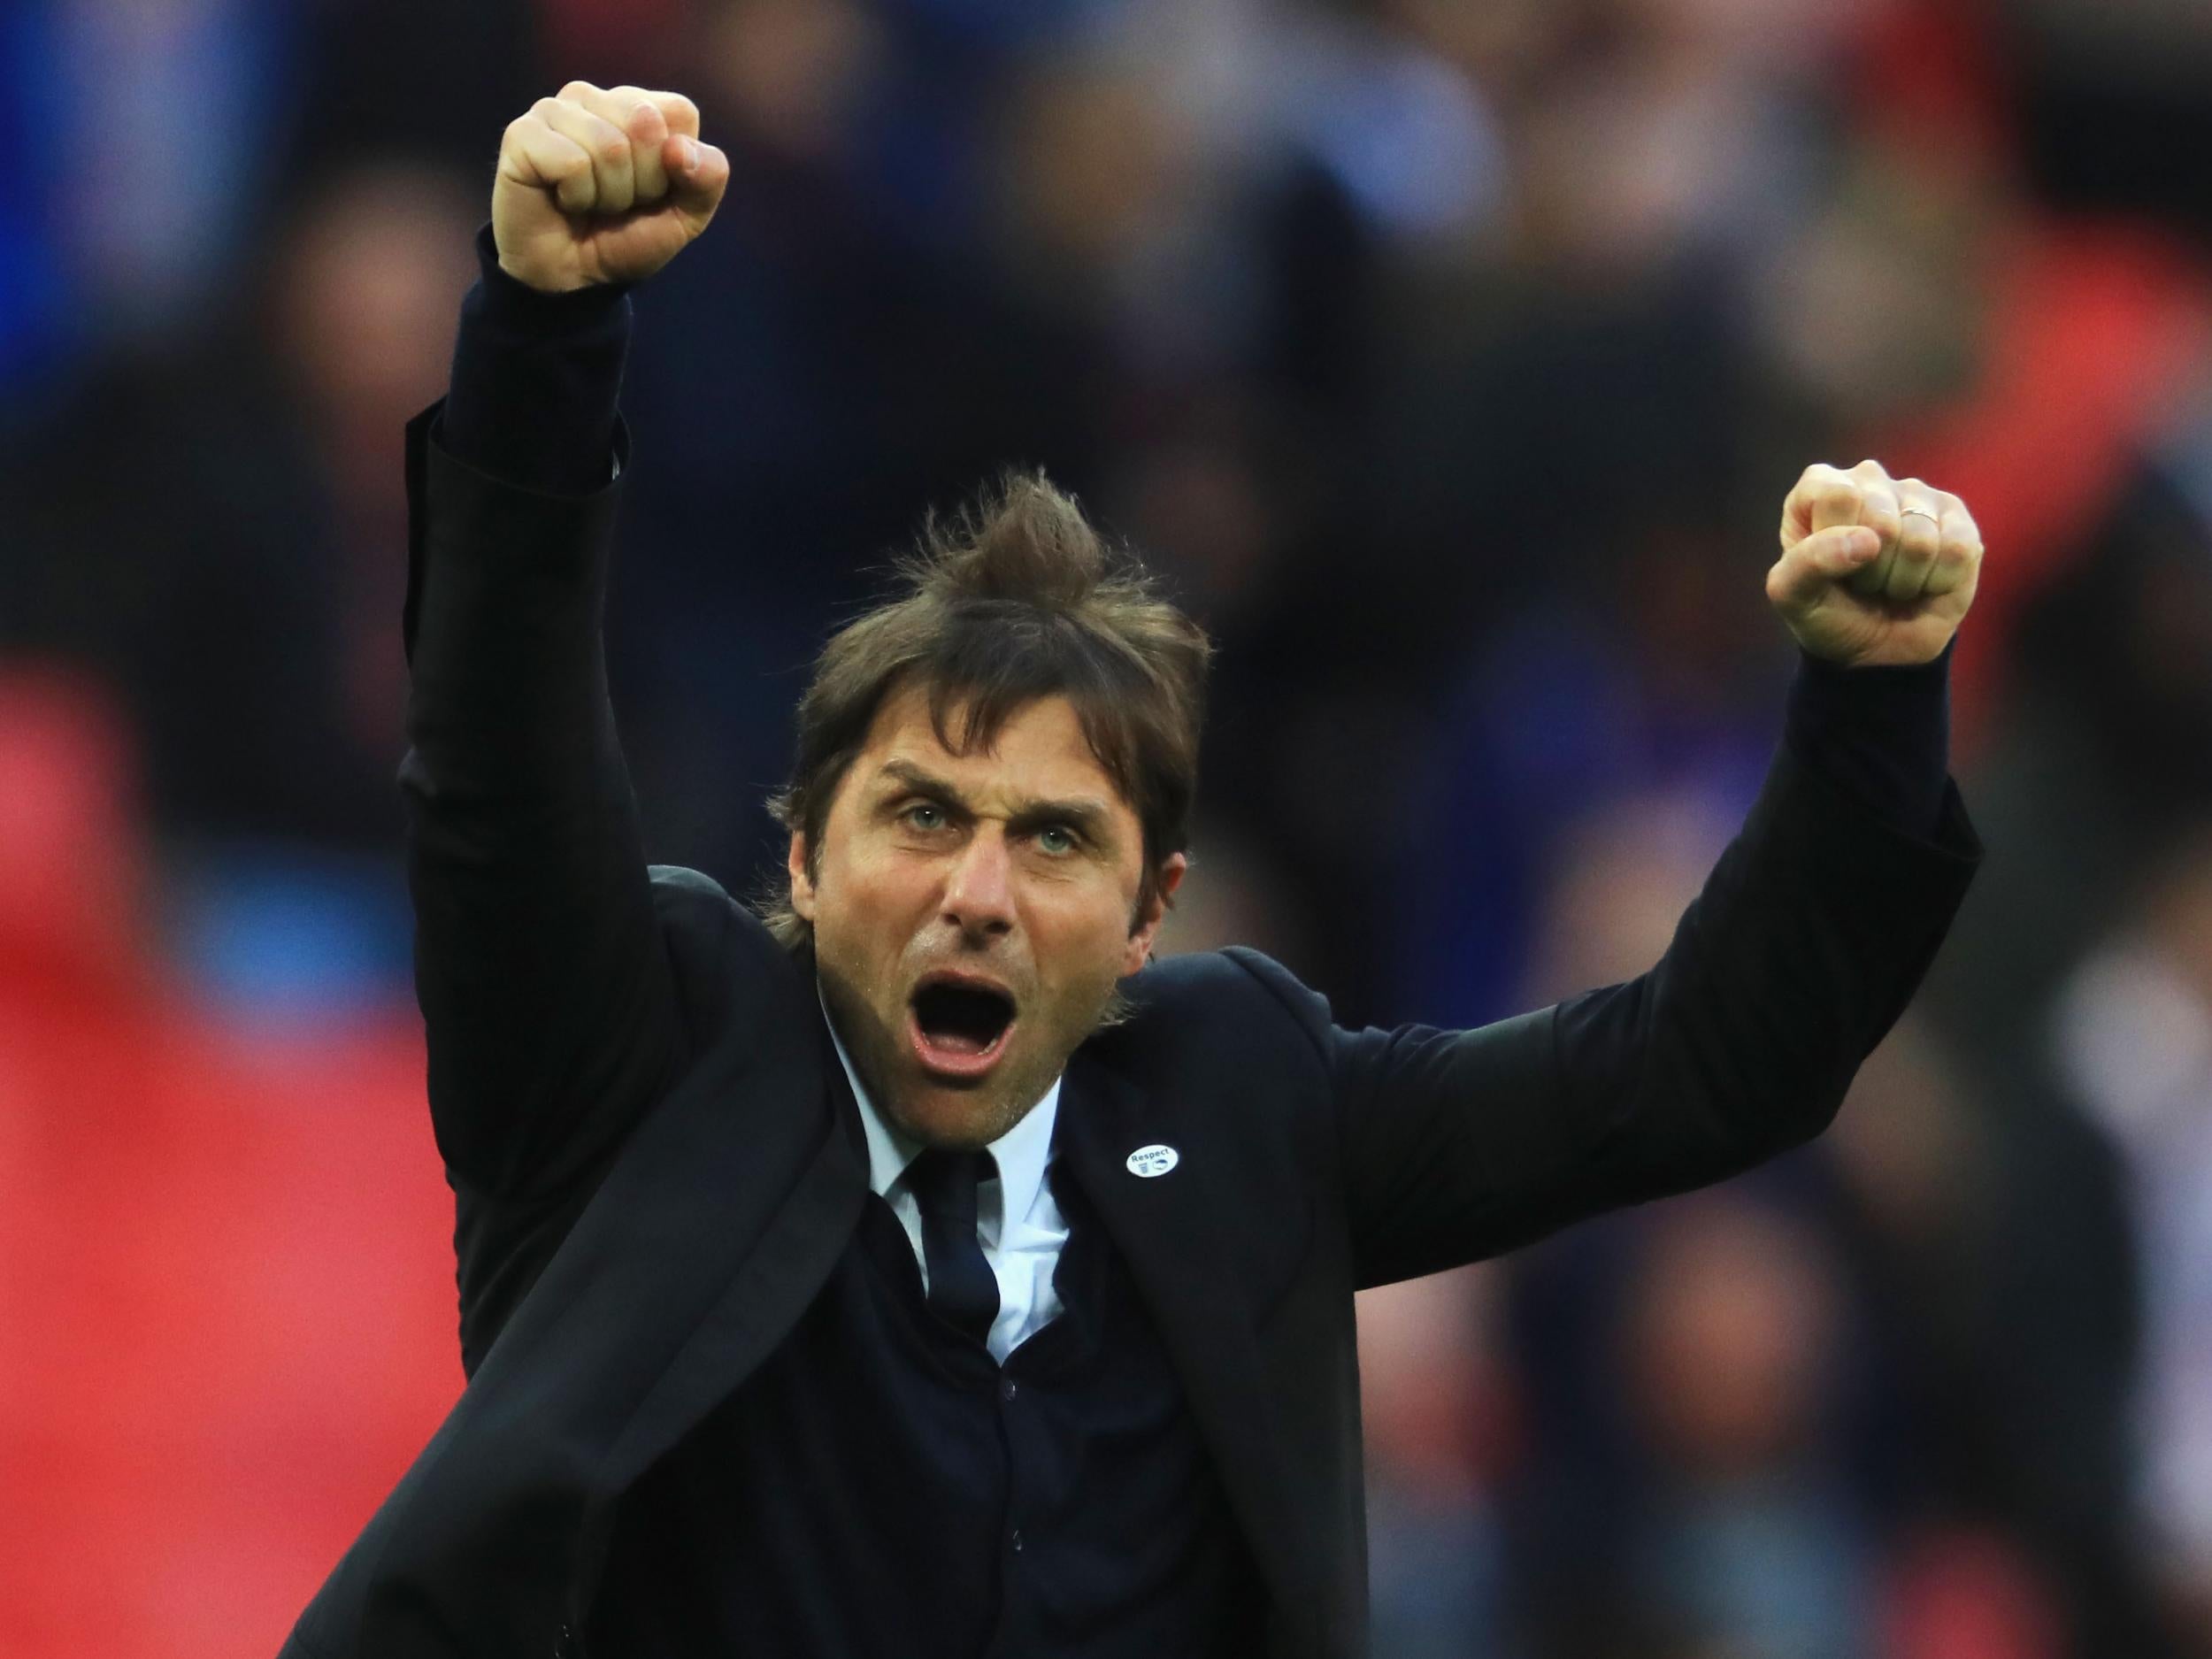 Antonio Conte was pleased with his side's performance at Wembley